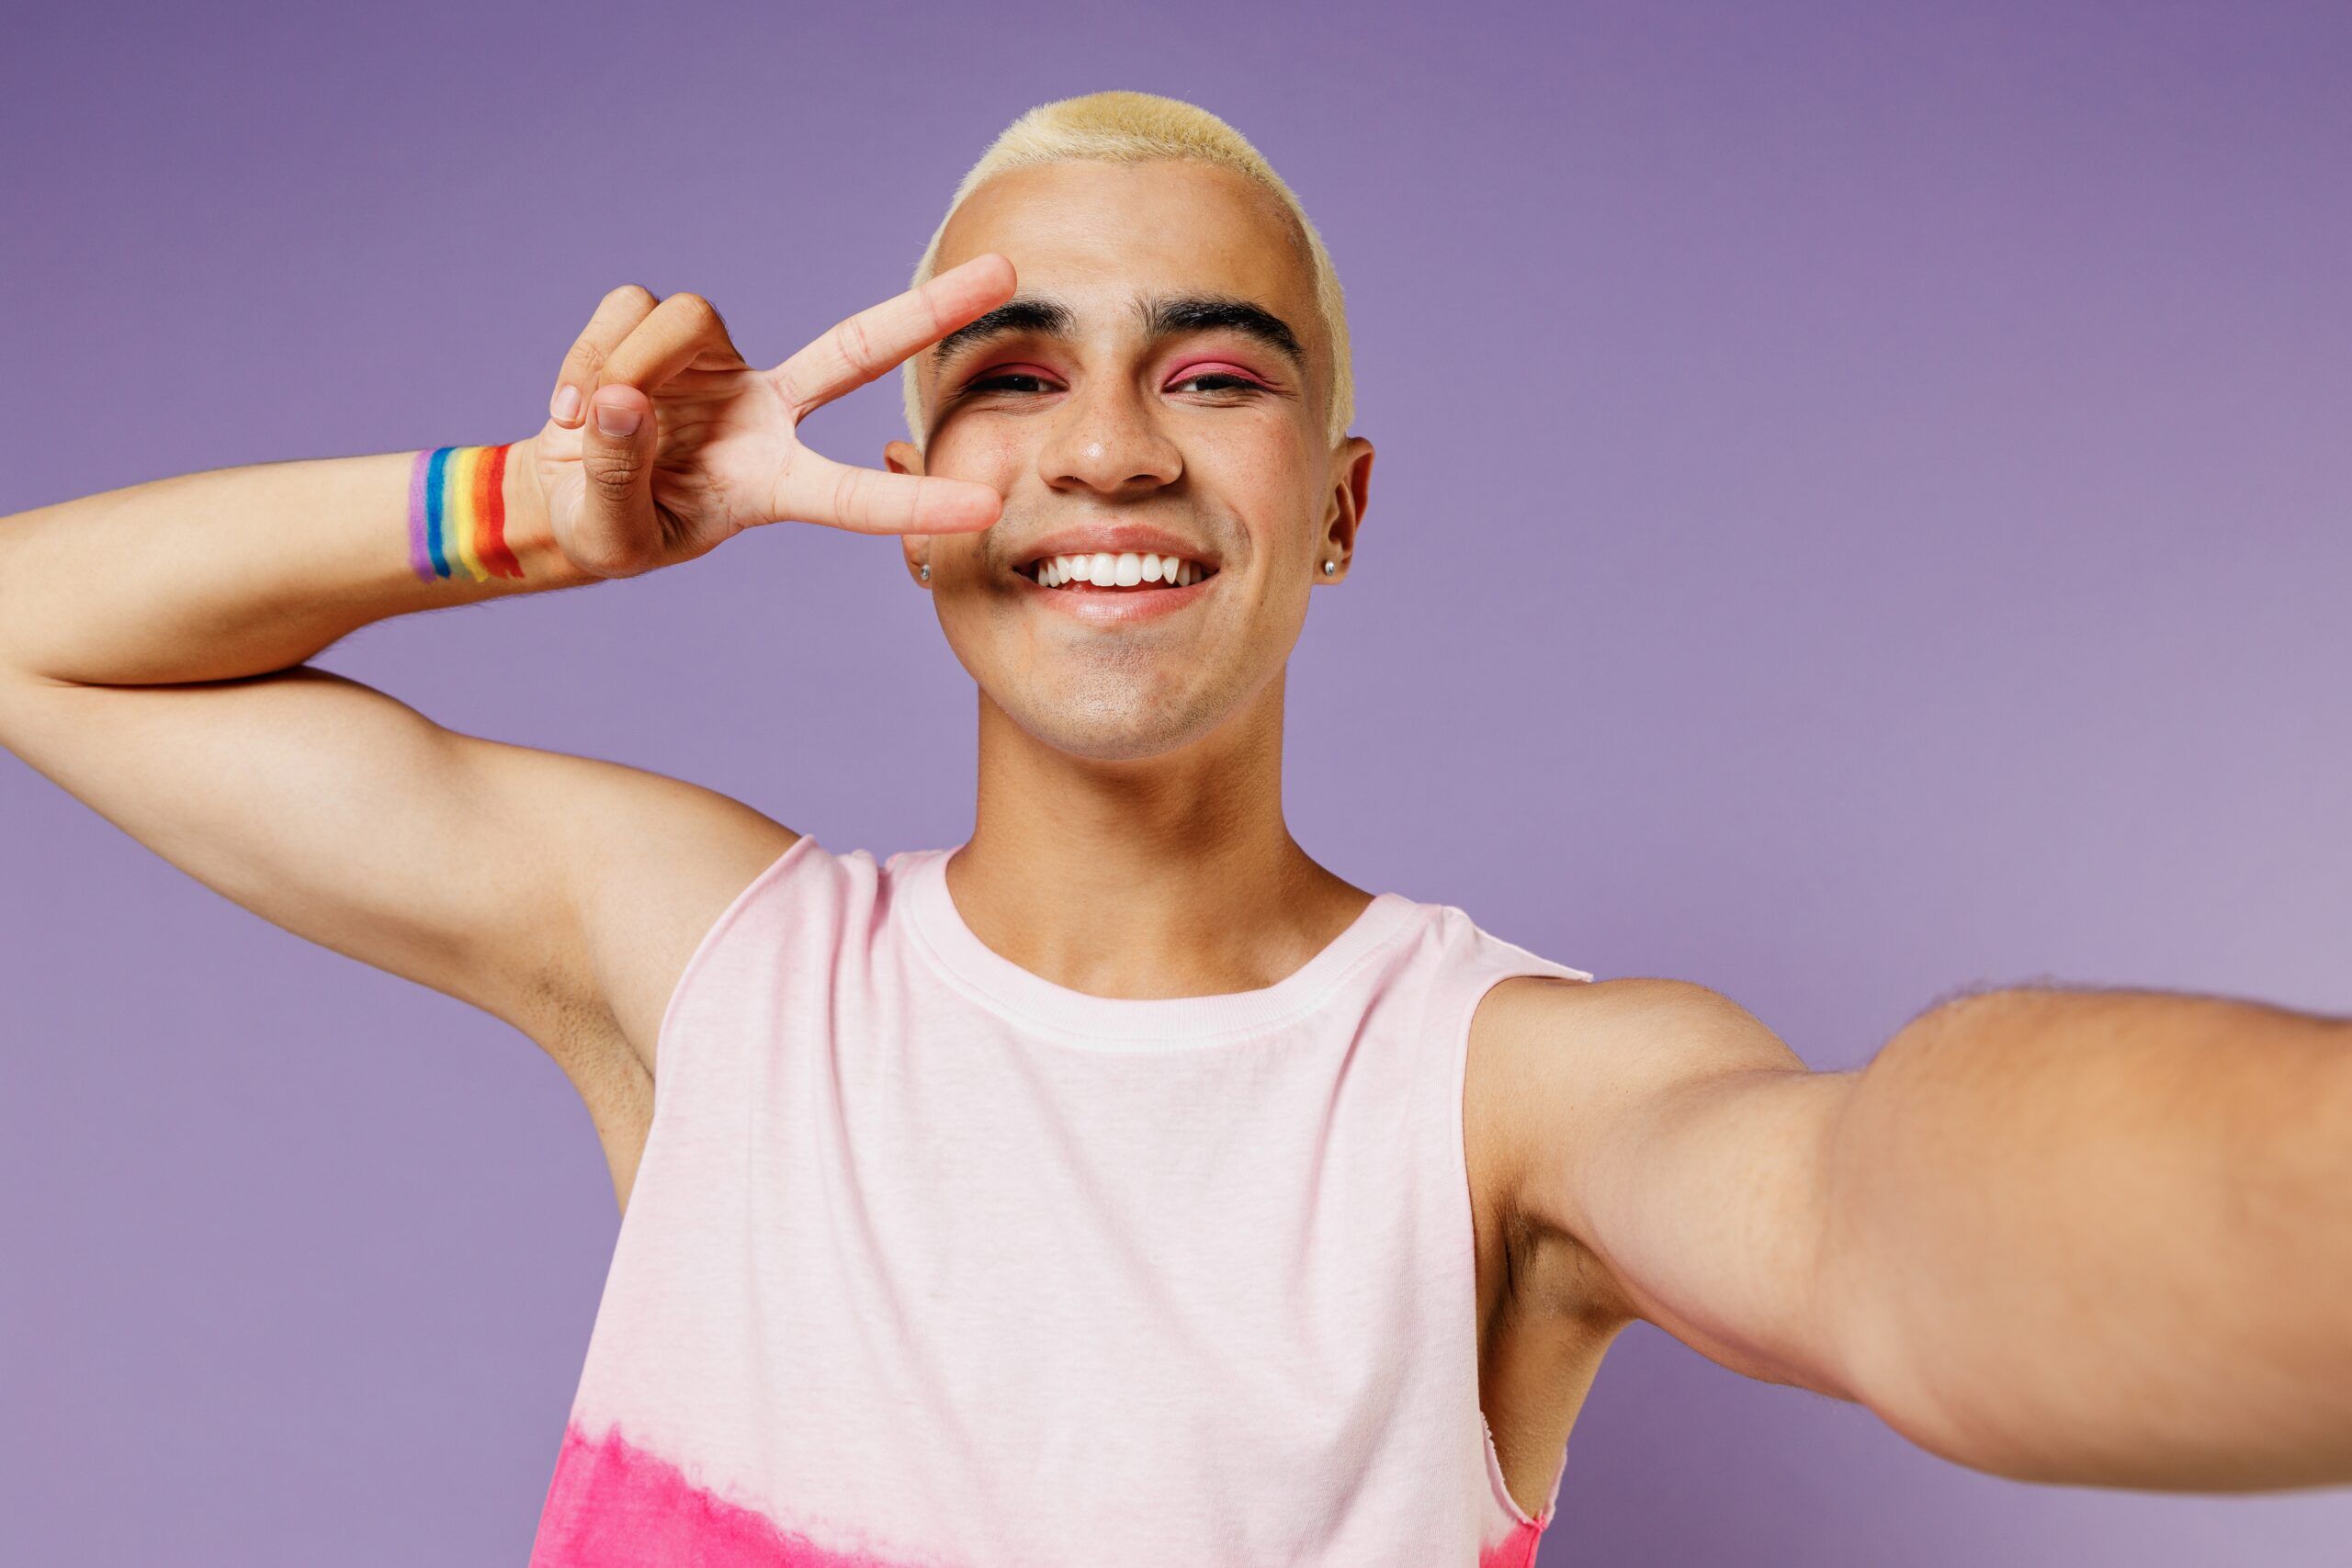 Young person with rainbow on arm